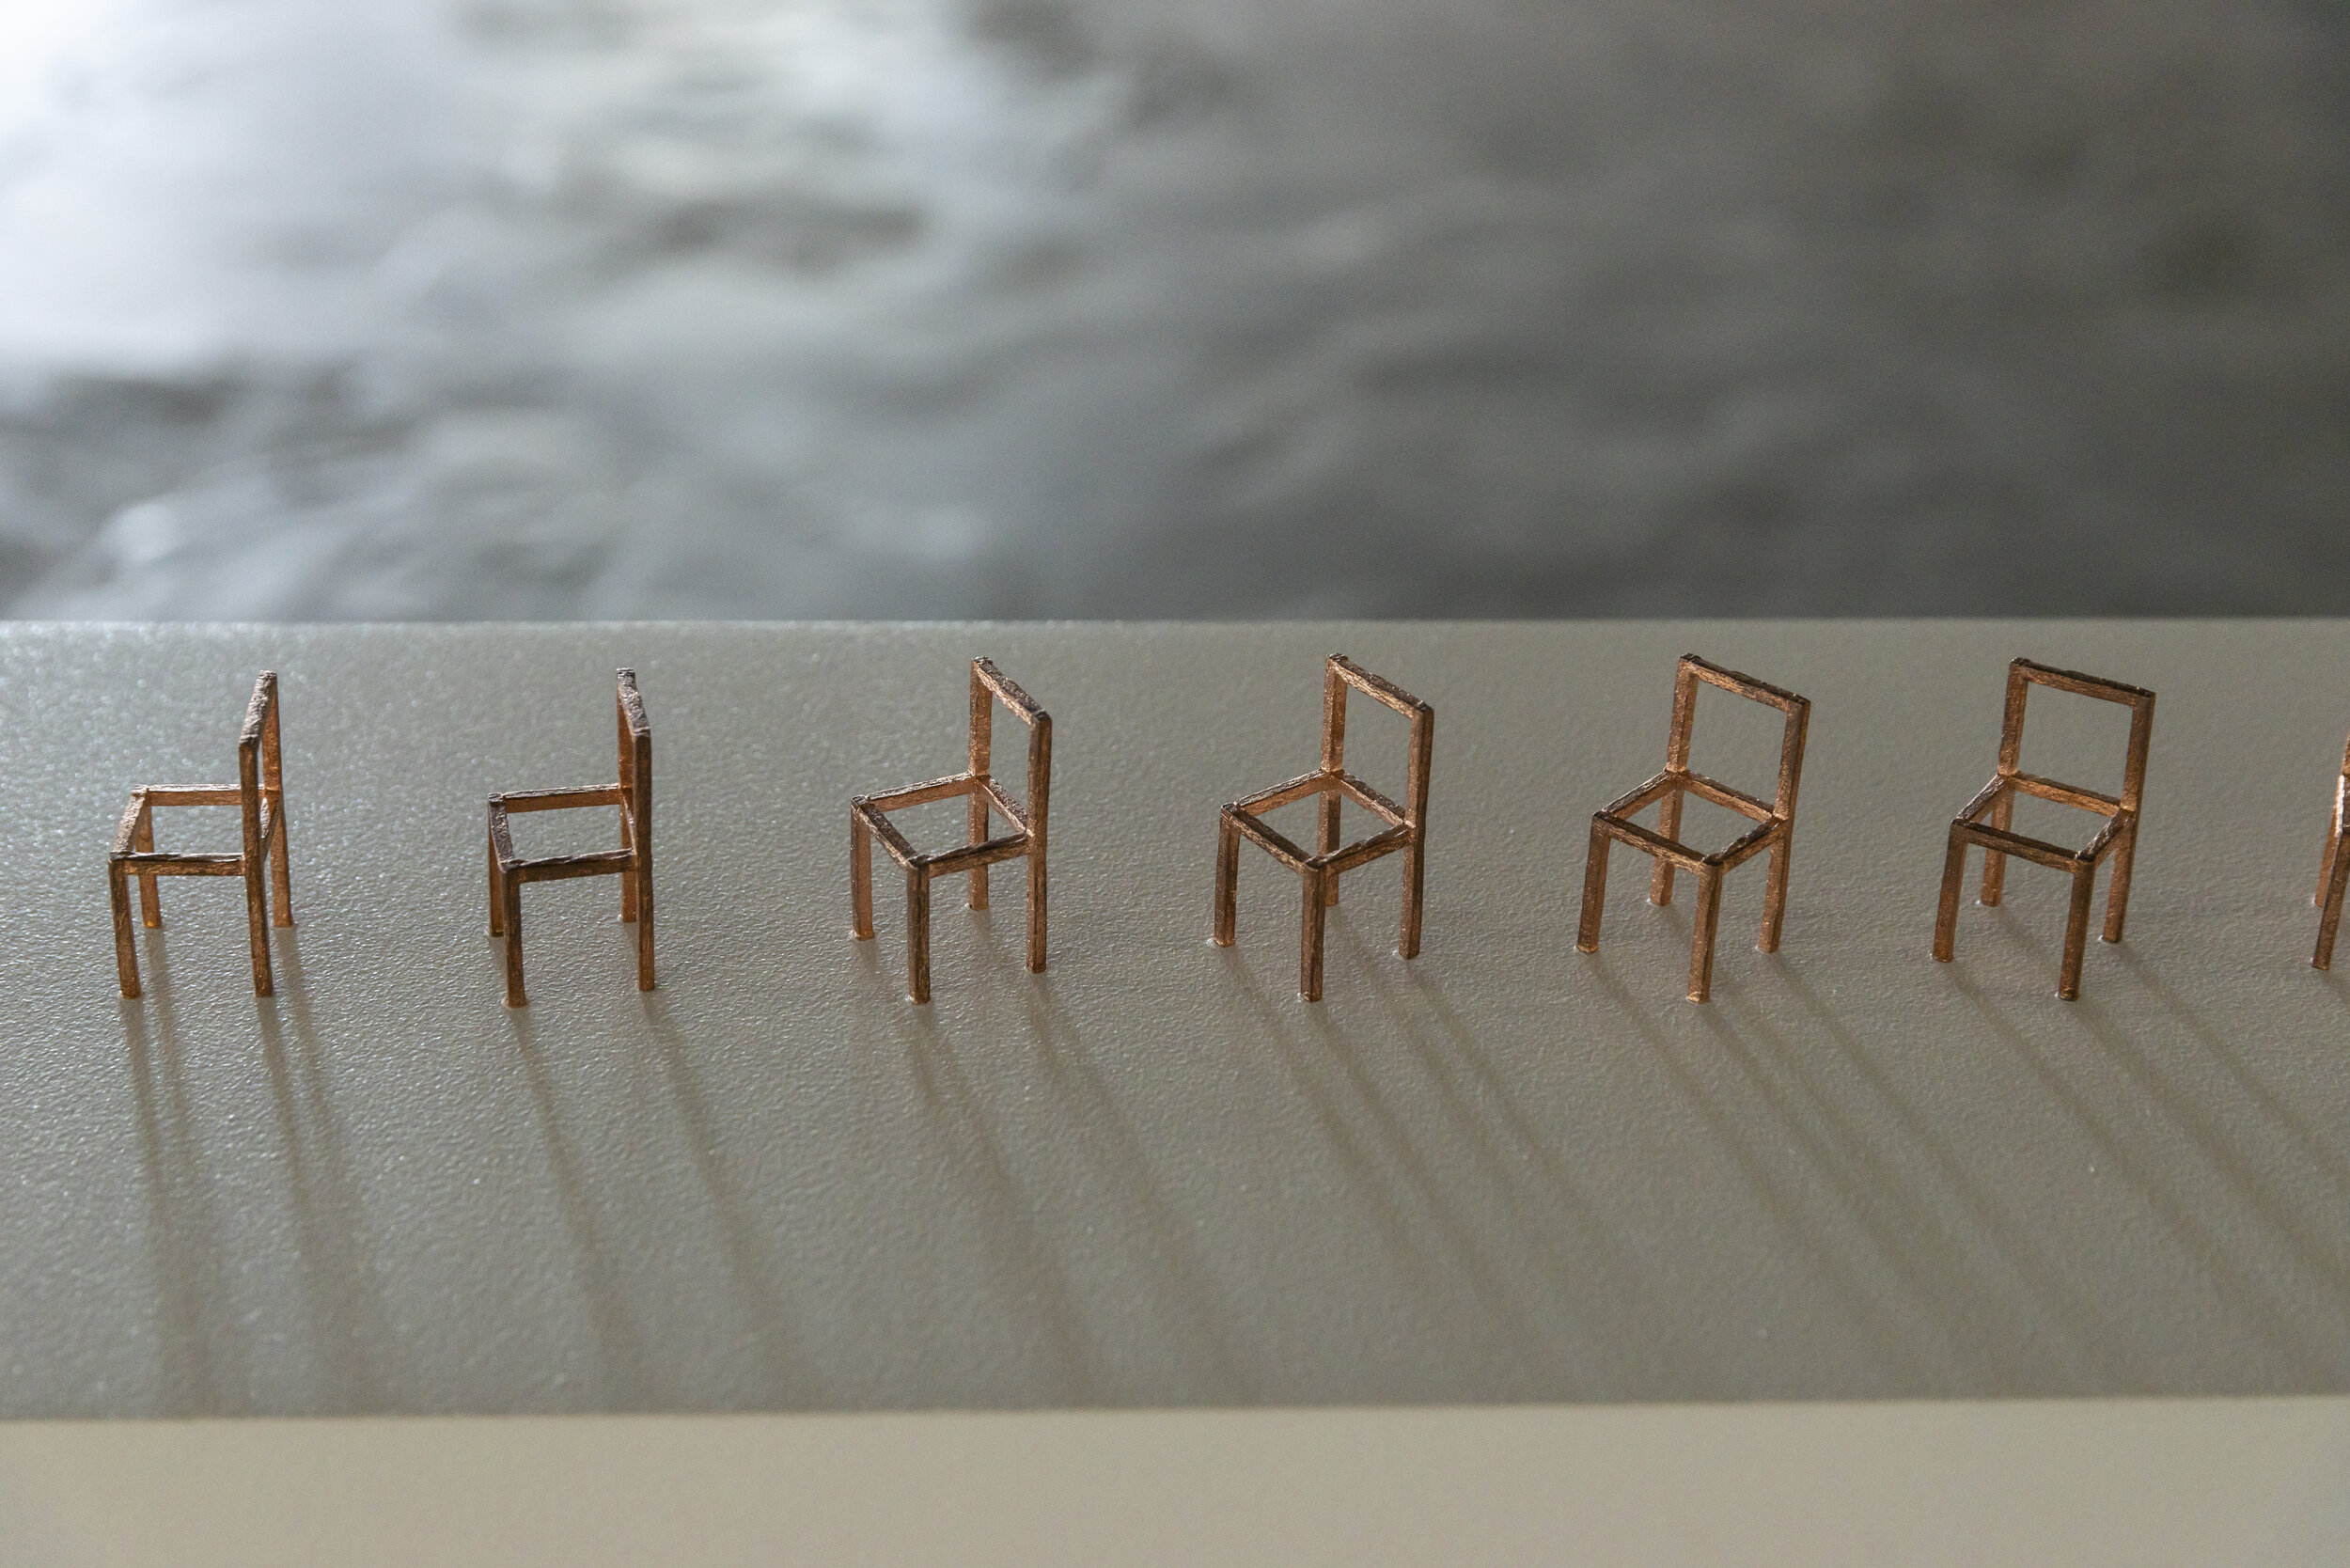   30 Bronze Chairs Facing Different Directions, and a Chair   Photo: Simon Strong  